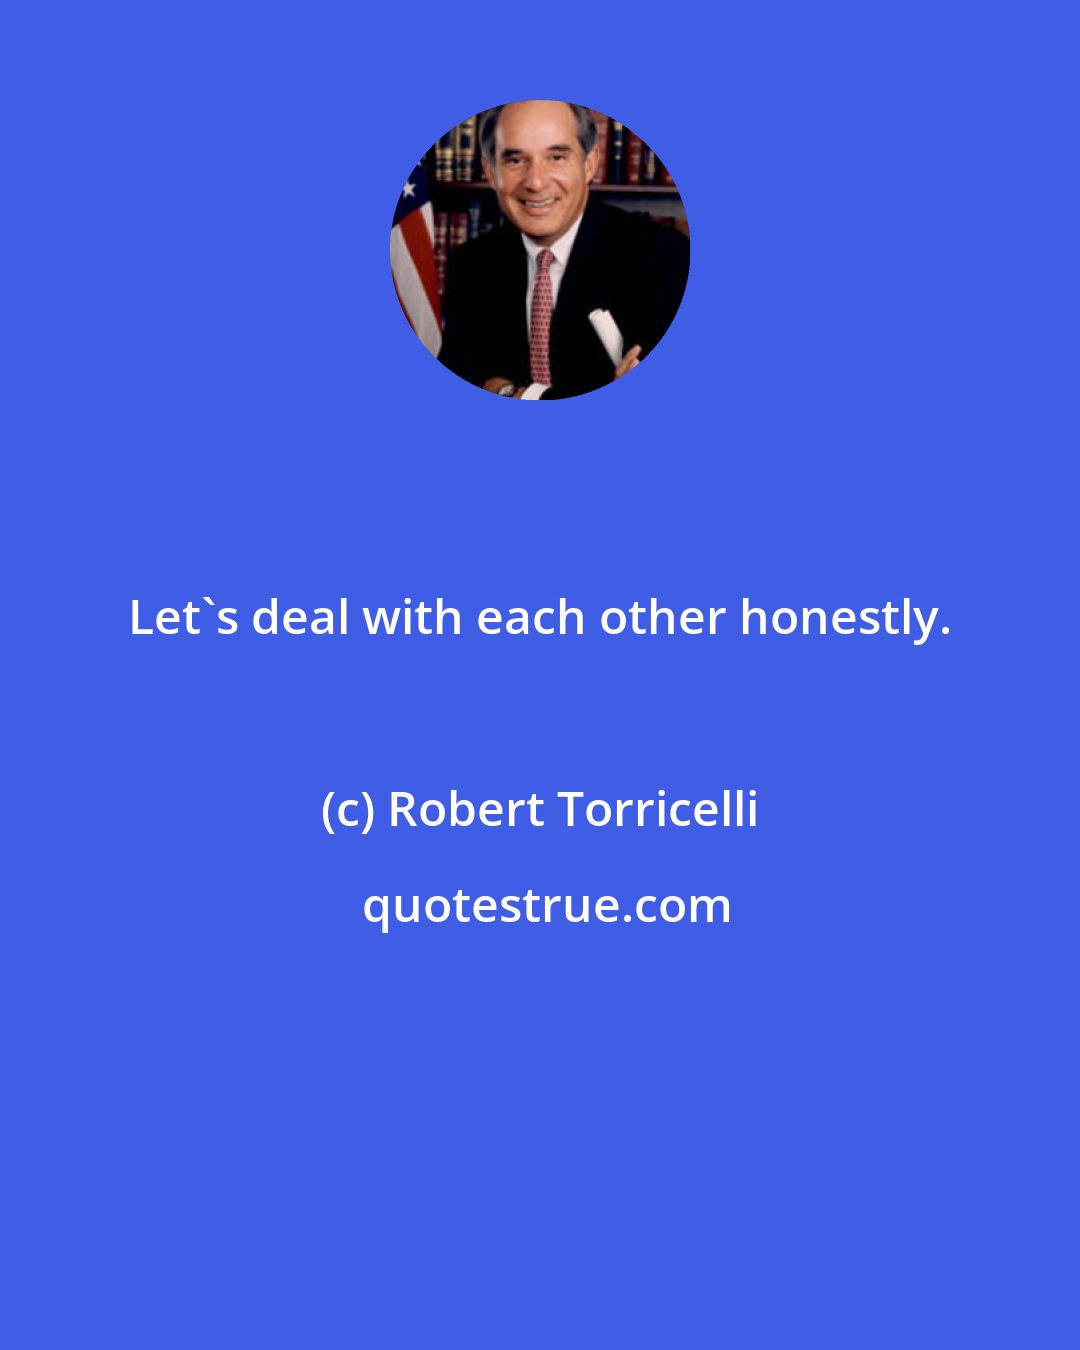 Robert Torricelli: Let's deal with each other honestly.